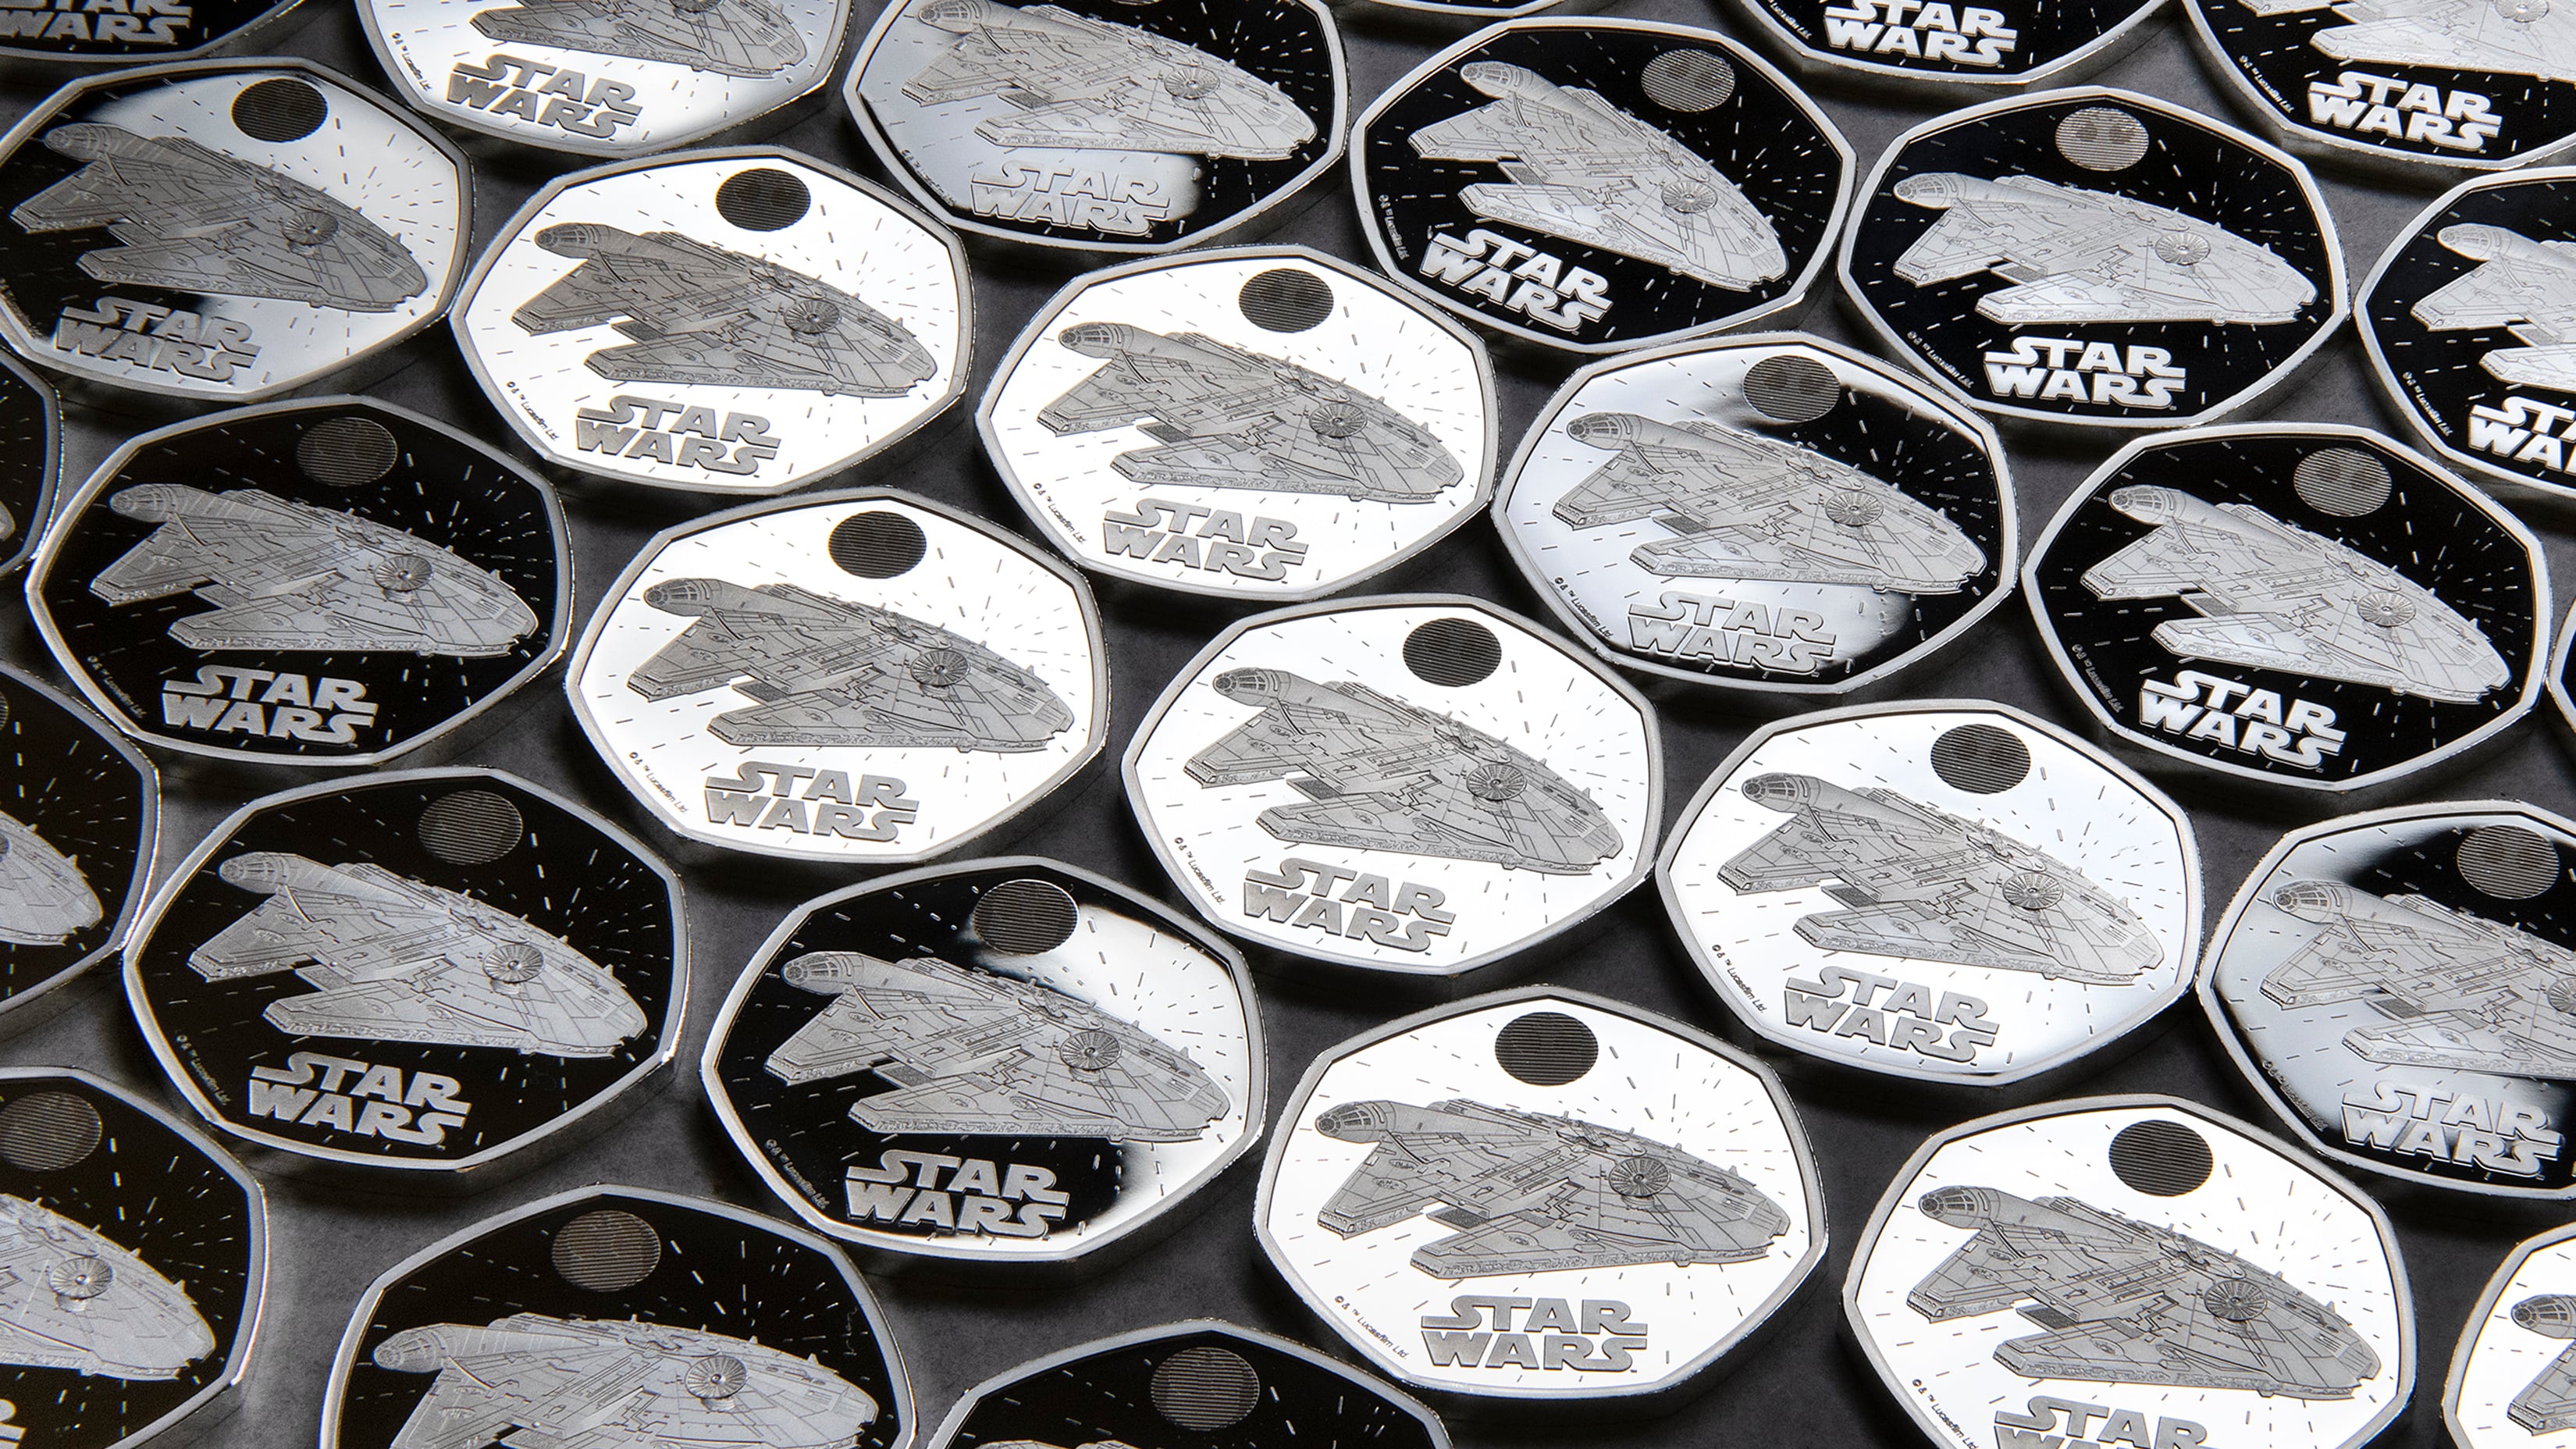 The second series of Star Wars coins is dedicated to the franchise’s vehicles, the Royal Mint said